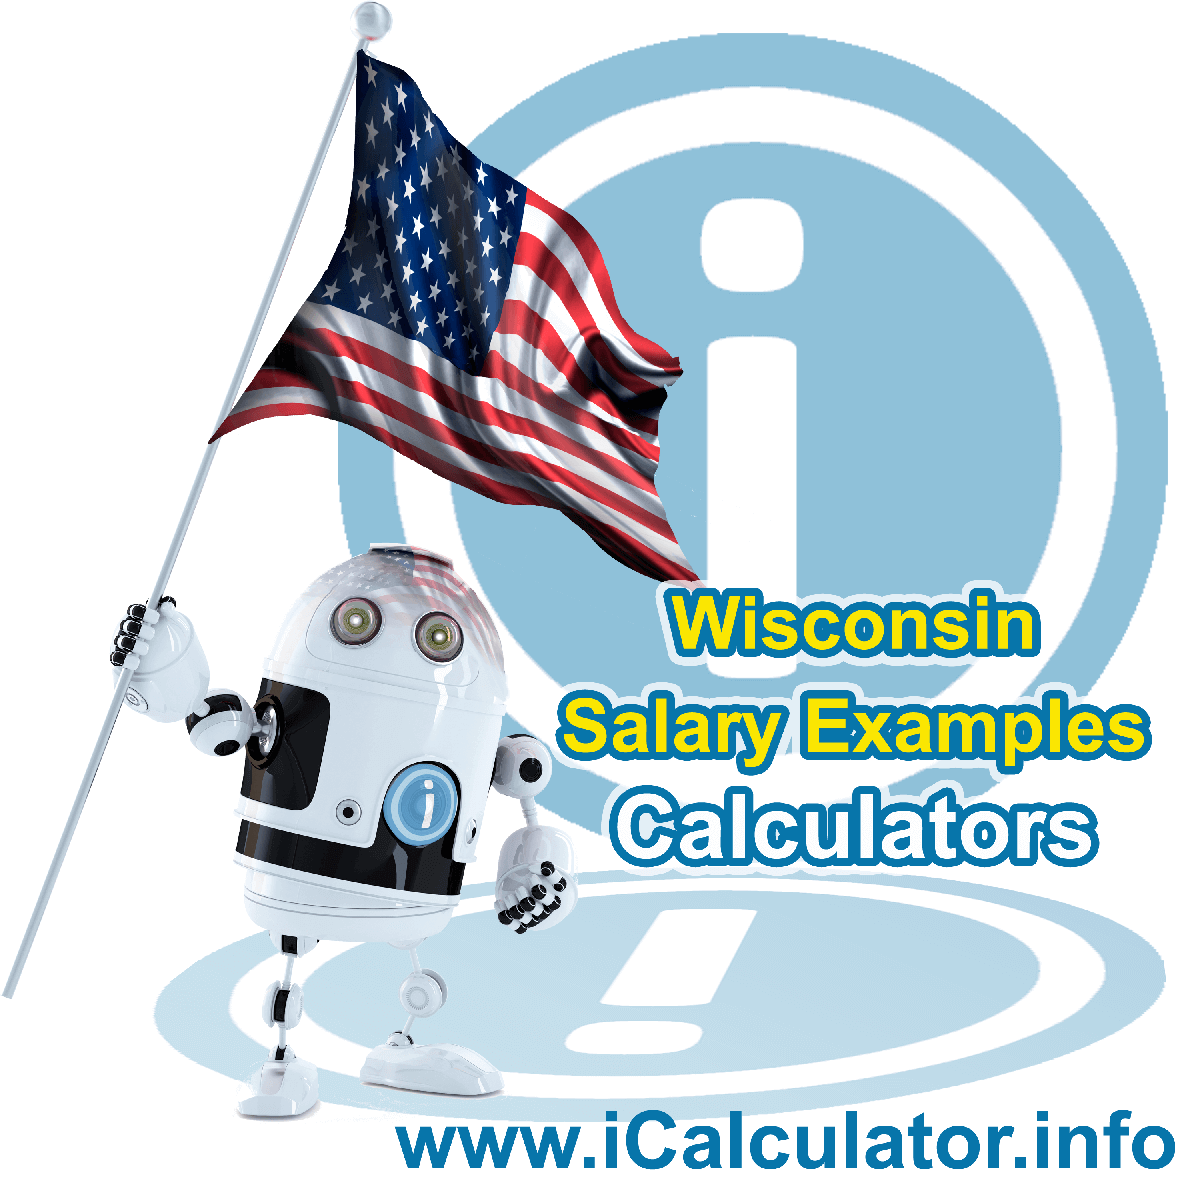 Wisconsin Salary Example for $ 300,000.00 in 2023 | iCalculator™ | $ 300,000.00 salary example for employee and employer paying Wisconsin State tincome taxes. Detailed salary after tax calculation including Wisconsin State Tax, Federal State Tax, Medicare Deductions, Social Security, Capital Gains and other income tax and salary deductions complete with supporting Wisconsin state tax tables 